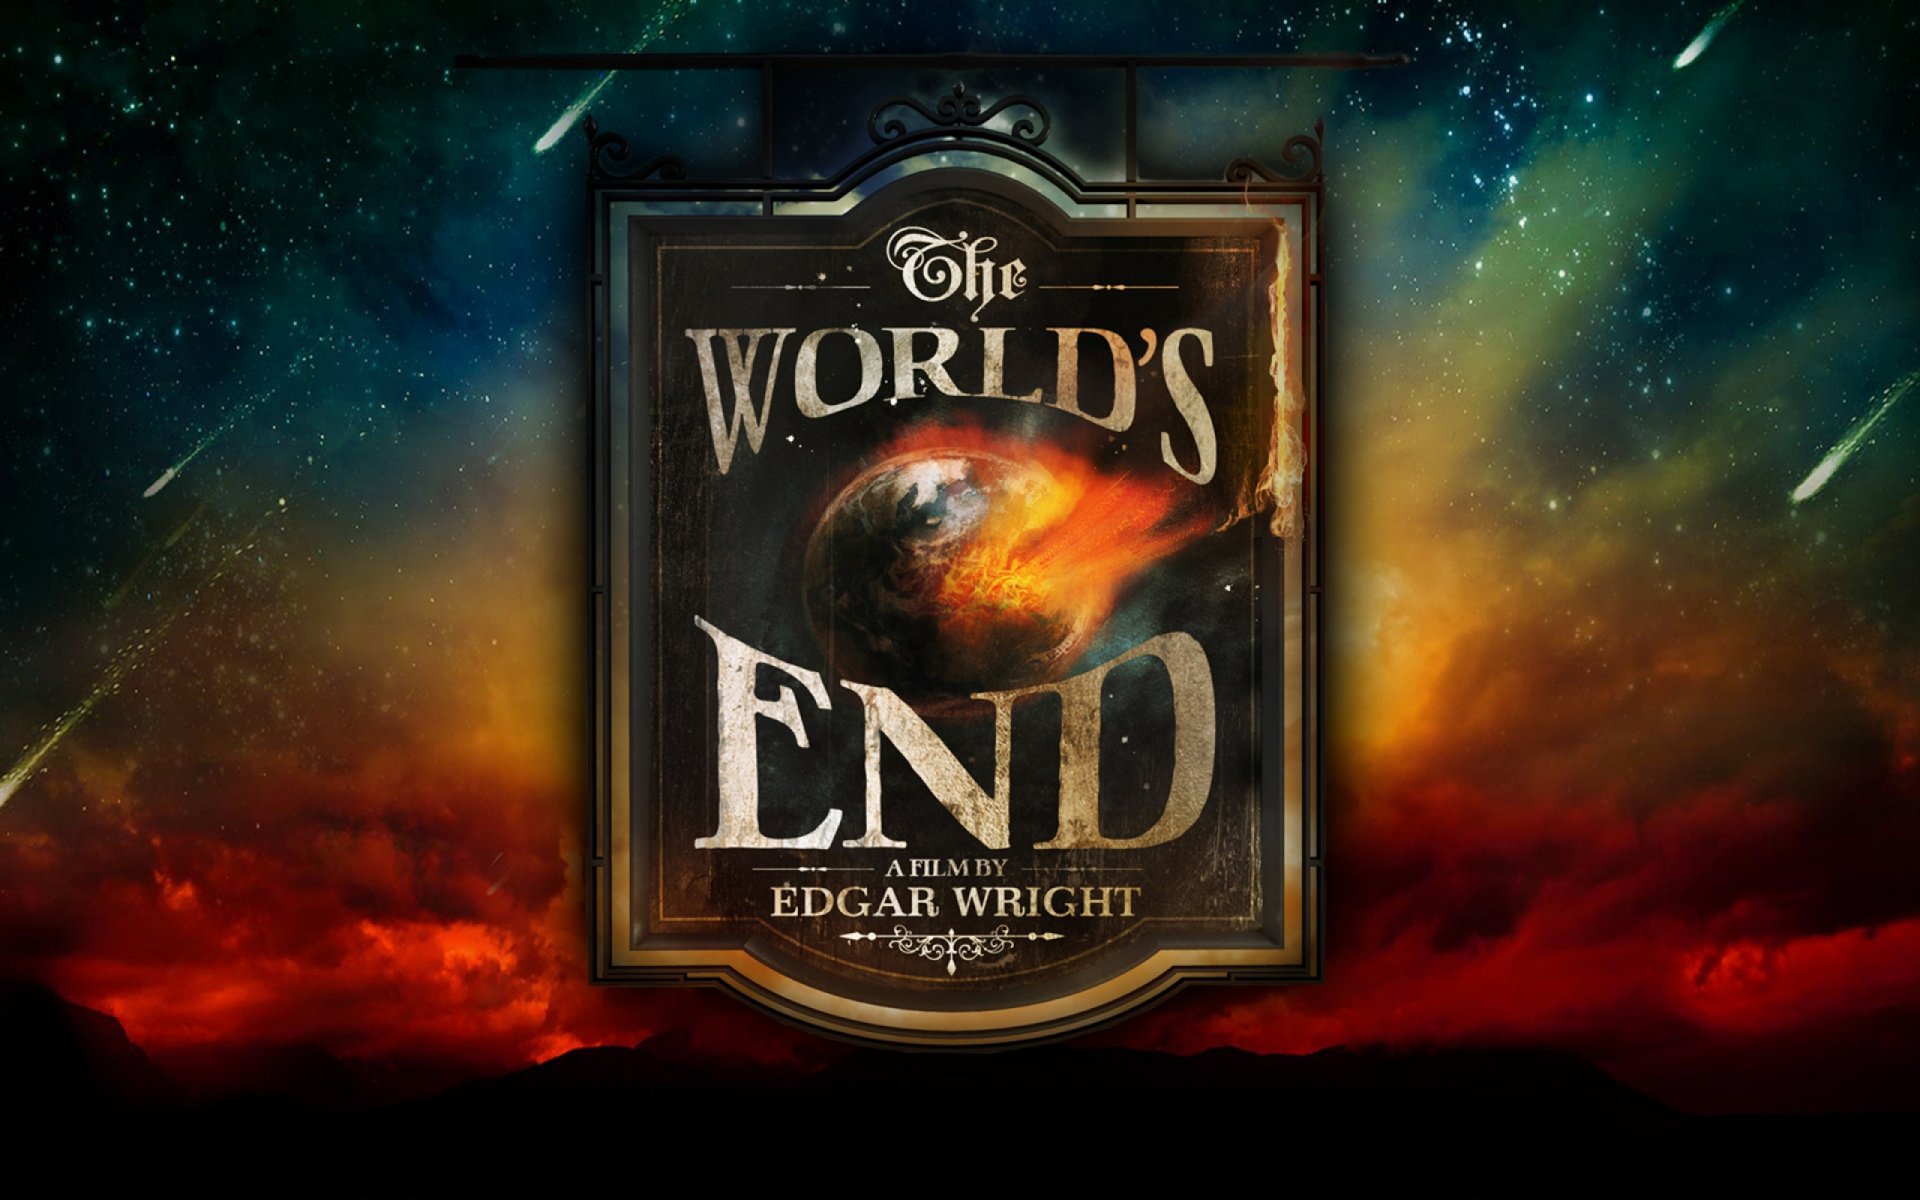 the wonderful end of the world free full download